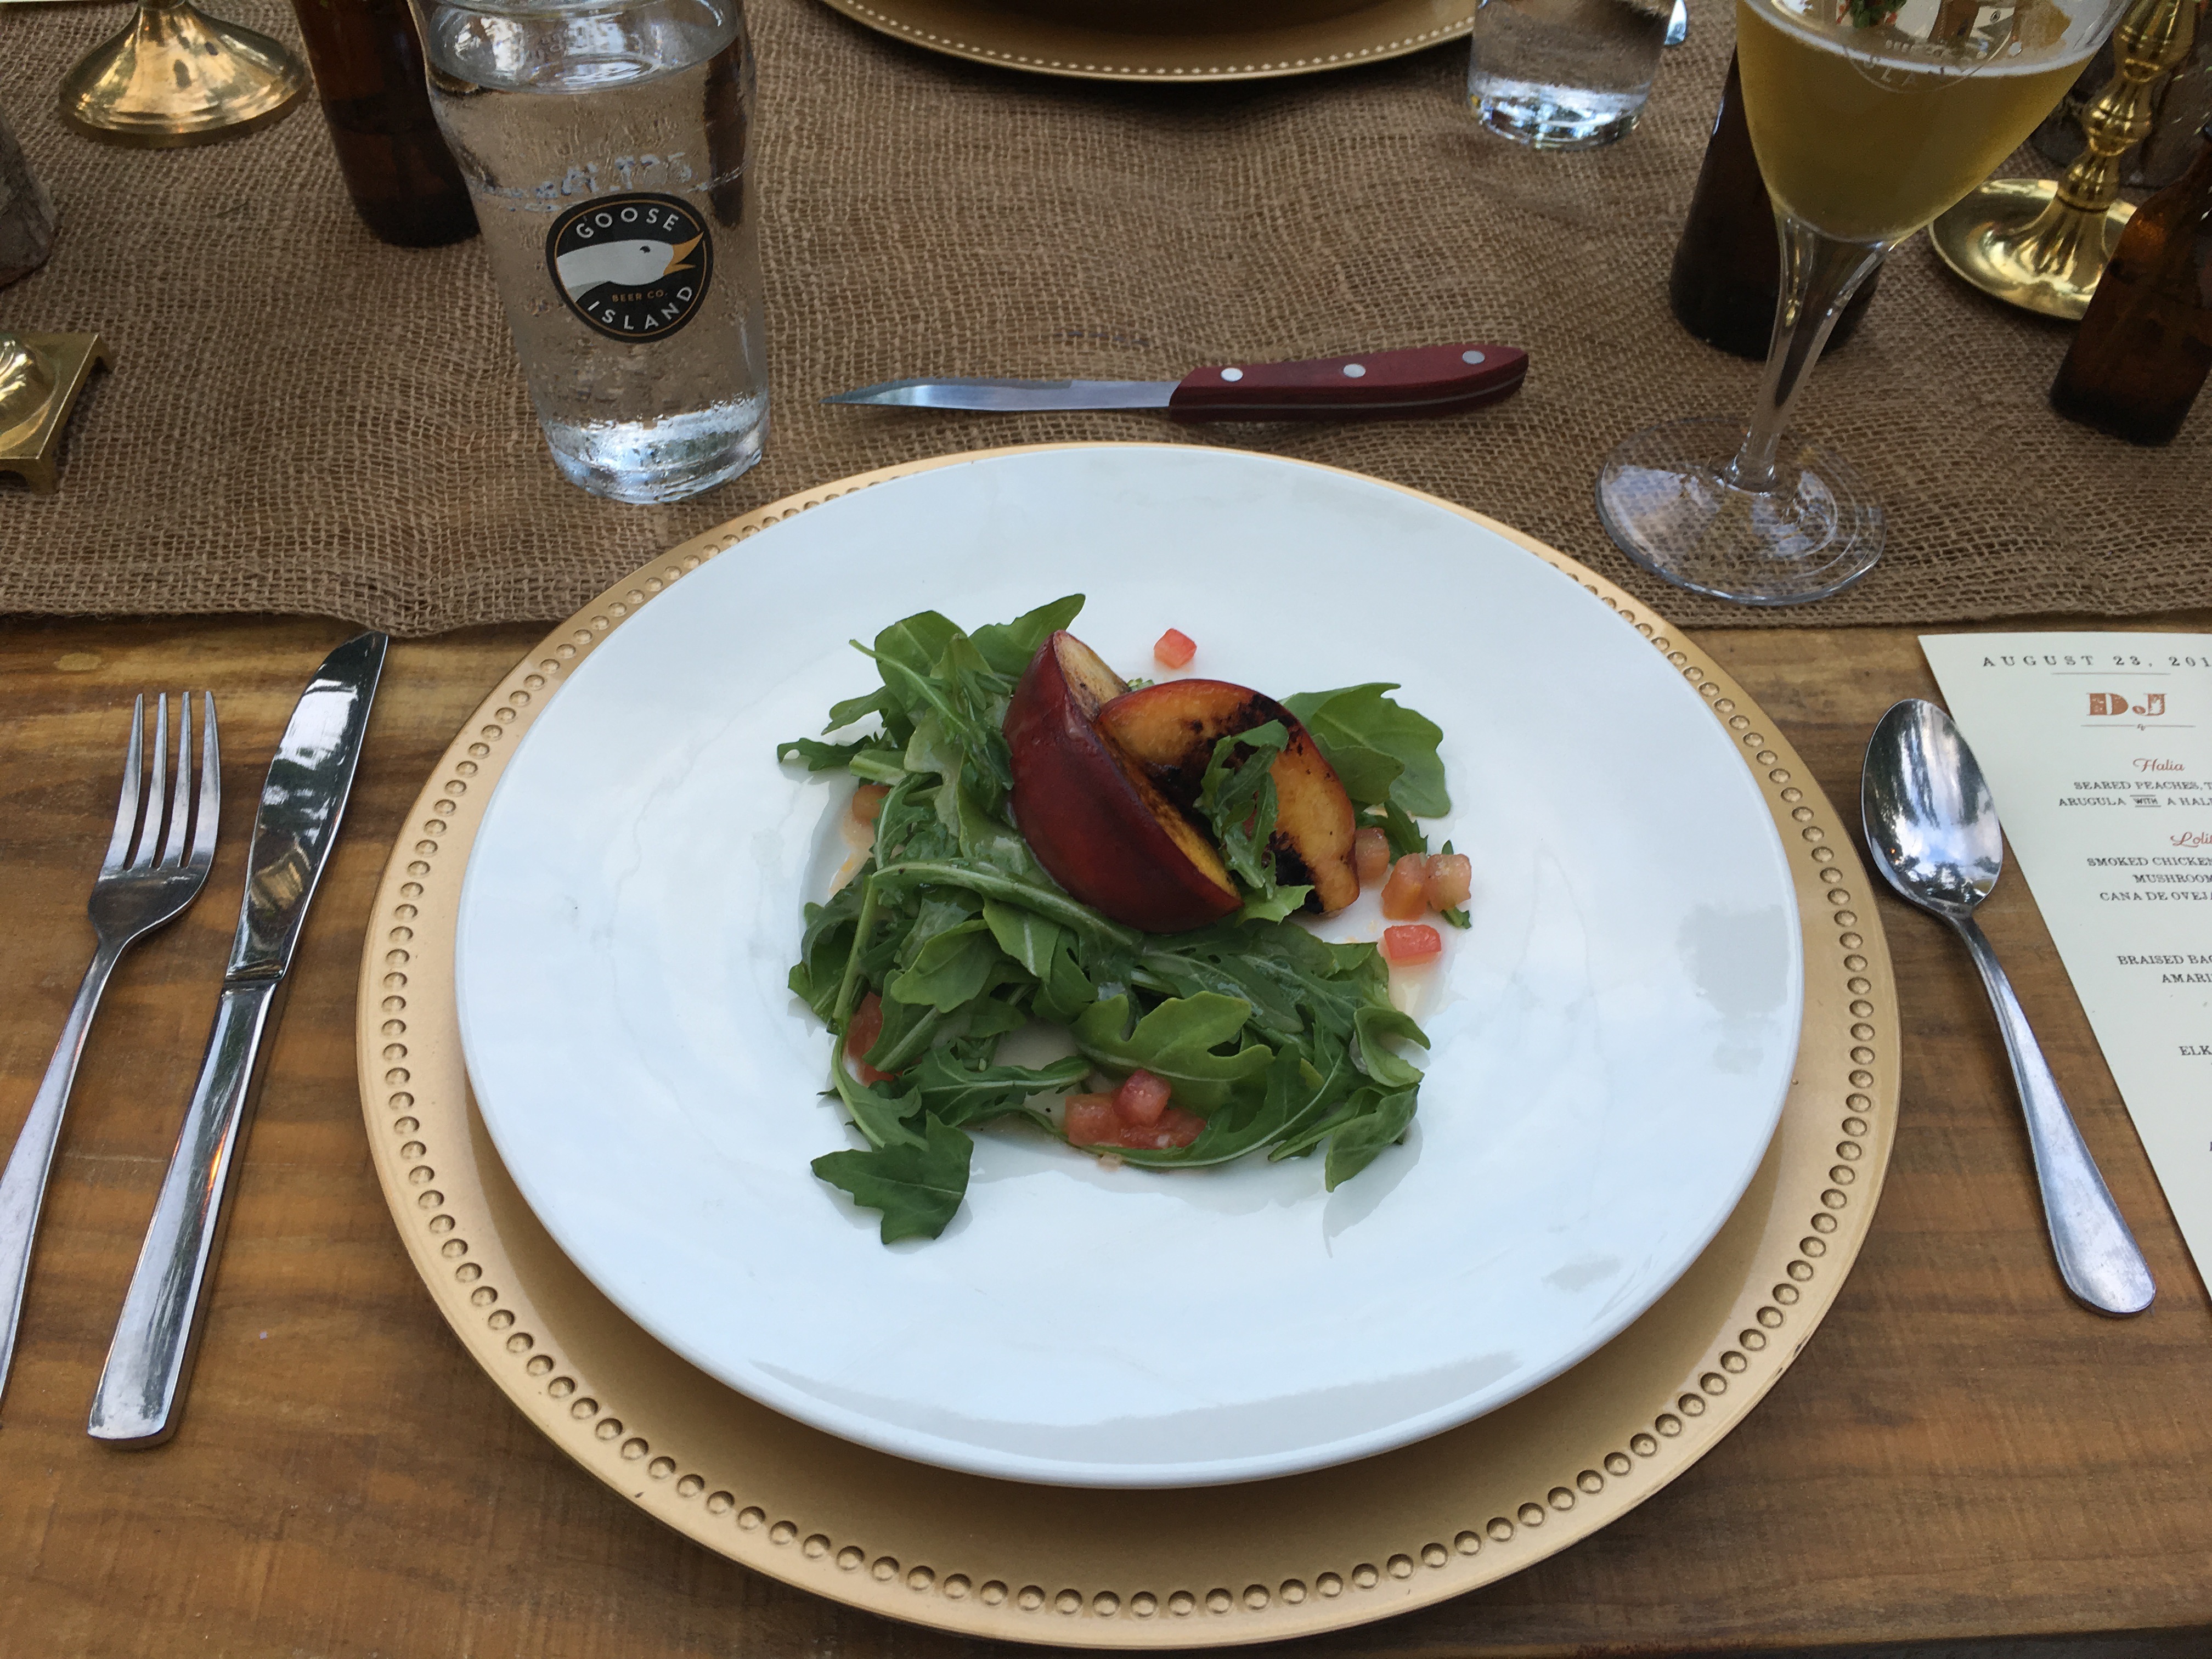 Hop field dinner first course of Seared Peaches, Tomato, Arugula with Halia Dressing at Elk Mountain Farms.